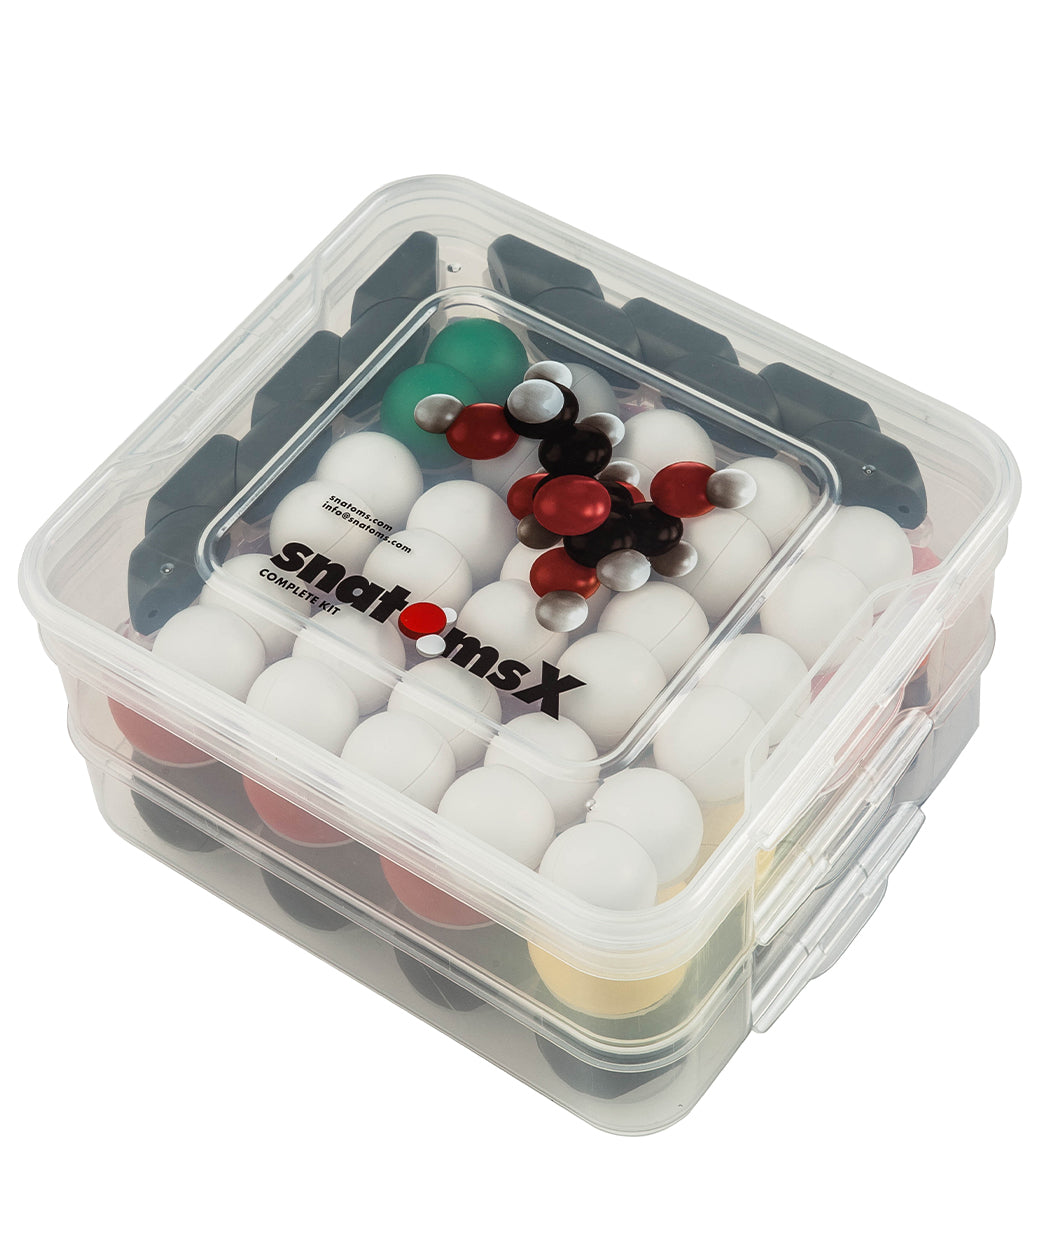 A clear, square plastic box full of various atom pieces arranged in rows. On the top of box is an image of a put-together molecule, and below that, the text 